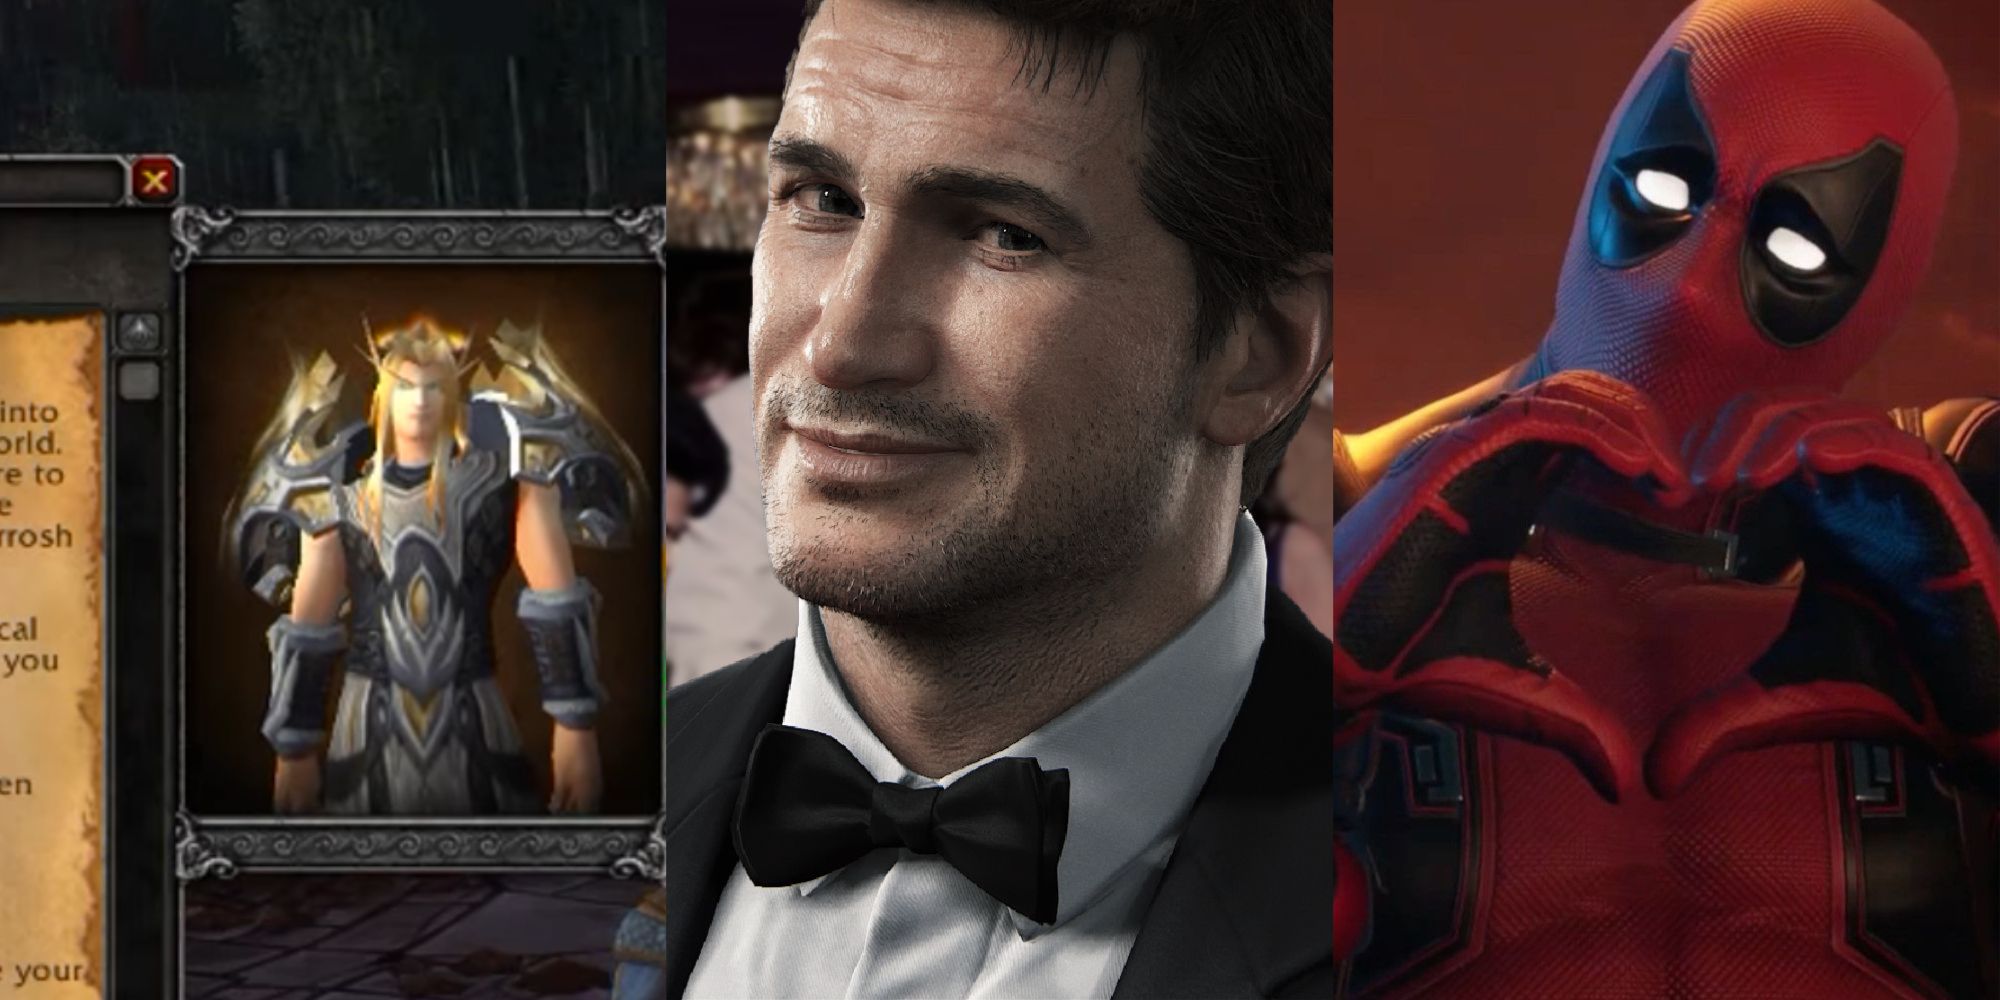 A split image collage of a character card of Kairoz in Warcraft, Nolan North's Nathan Drake in a tuxedo in Uncharted 4, and Deadpool making a heart-shape with his hands in Midnight Suns.